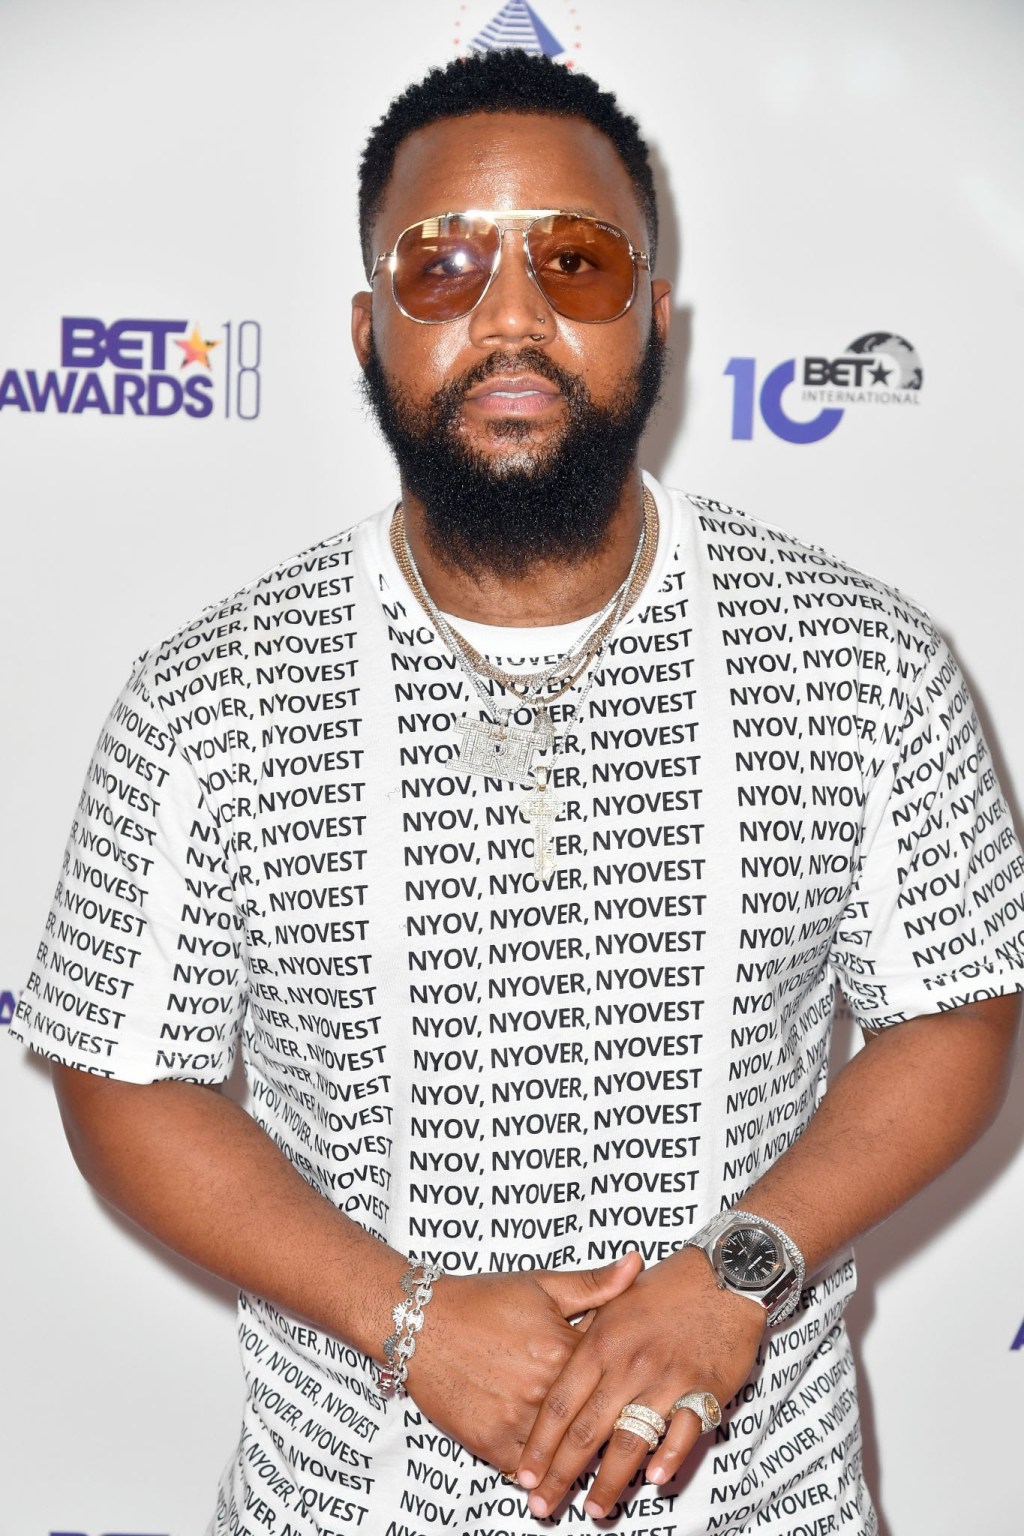 ‘I’m verified in the streets’ – Cassper Nyovest On Paying For Twitter Verification